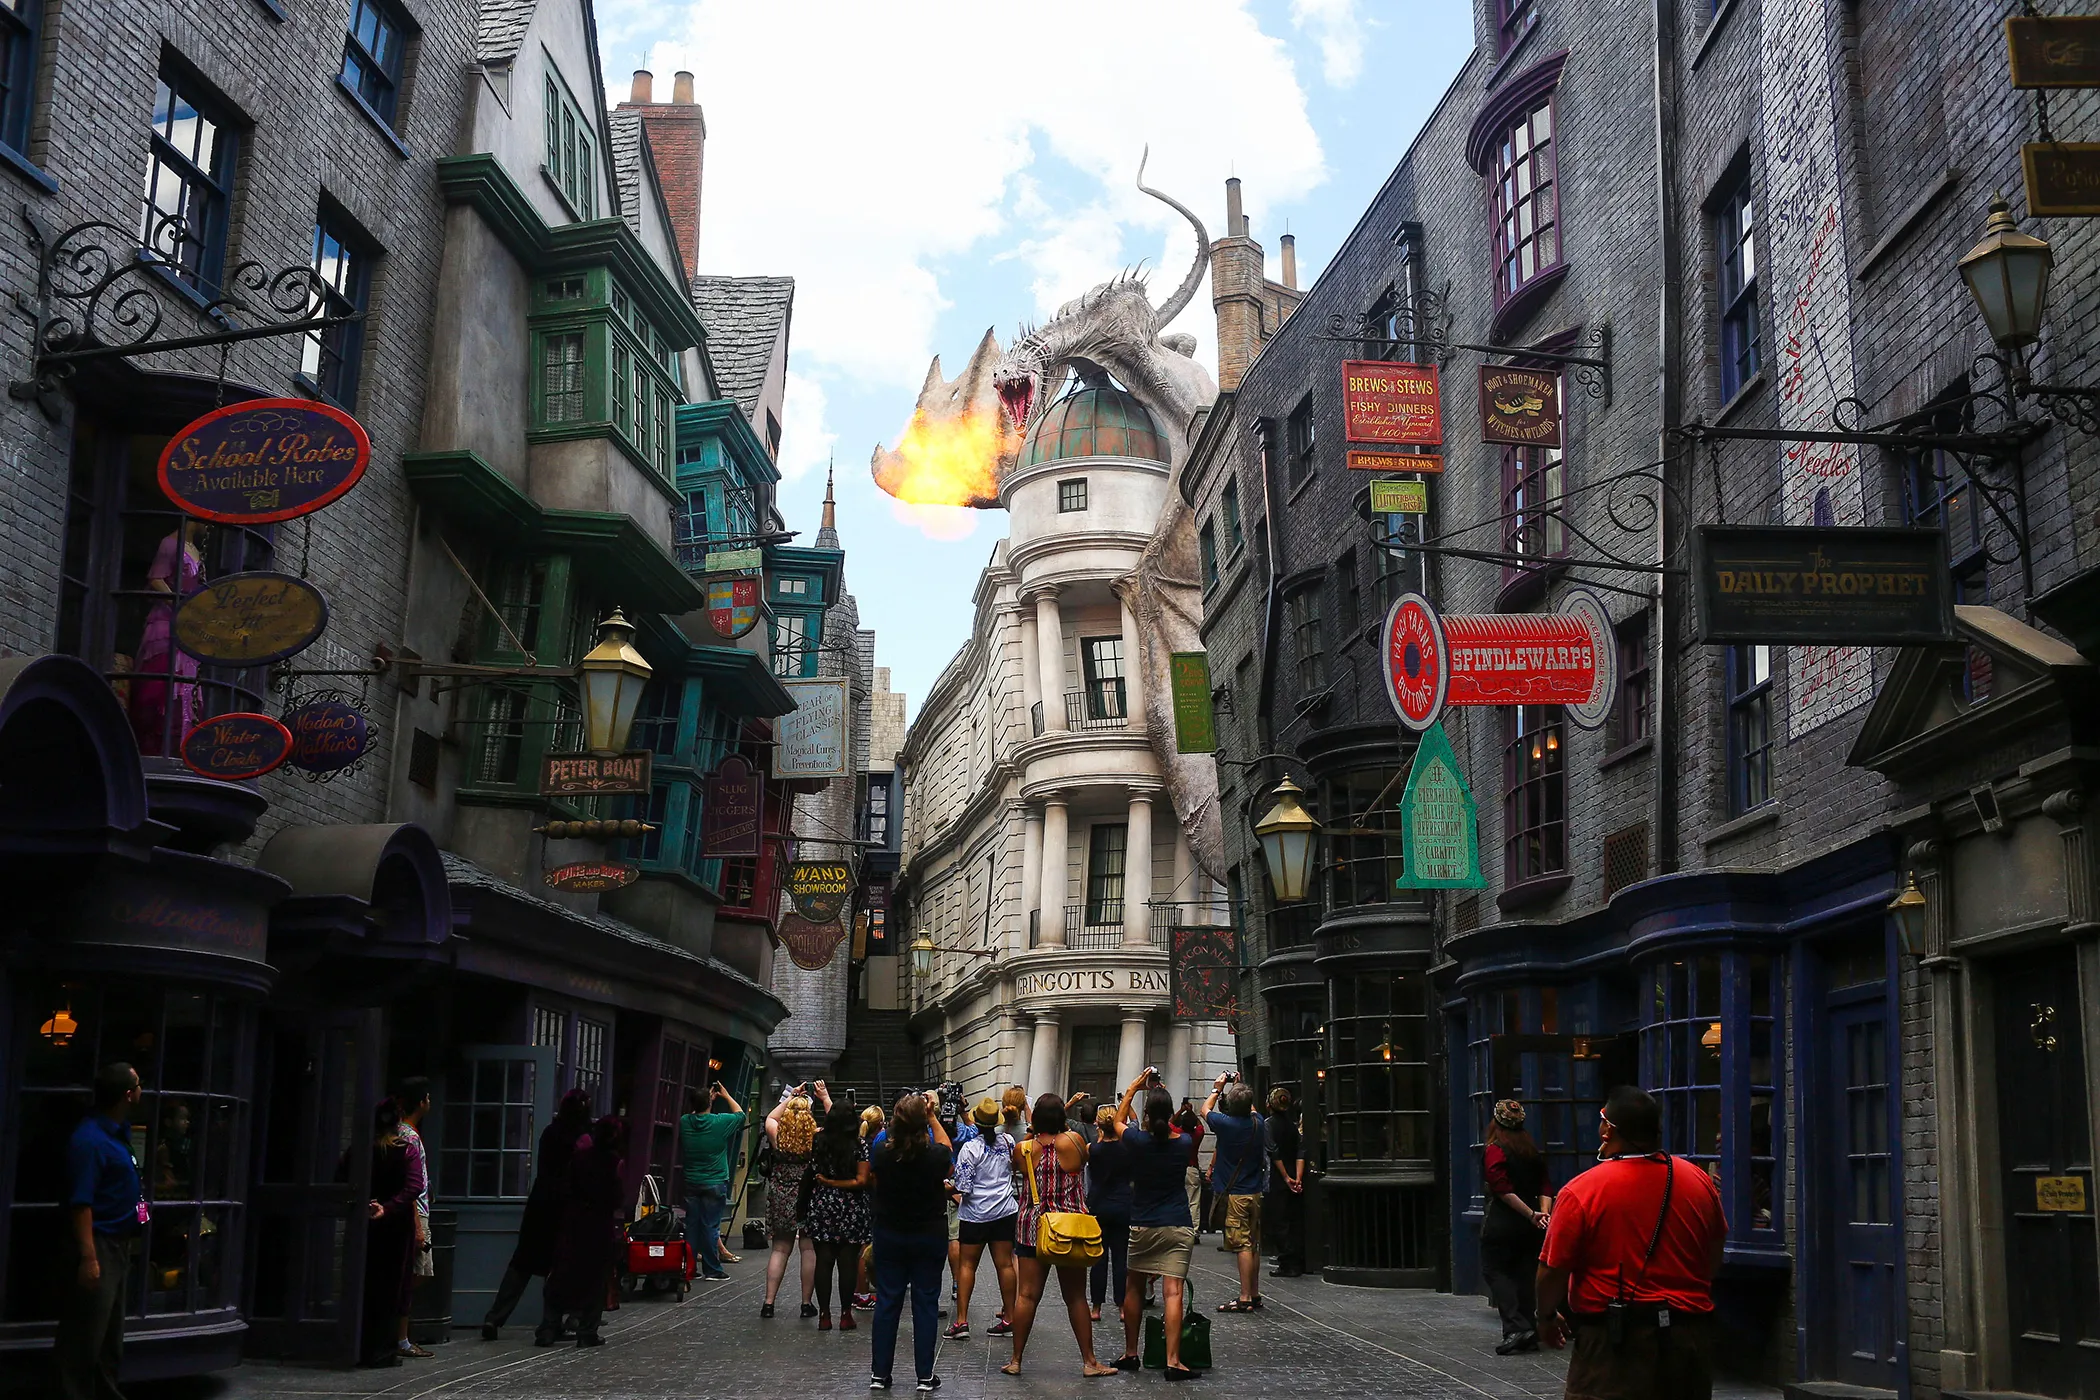 How Much Does Universal Studios Florida Cost